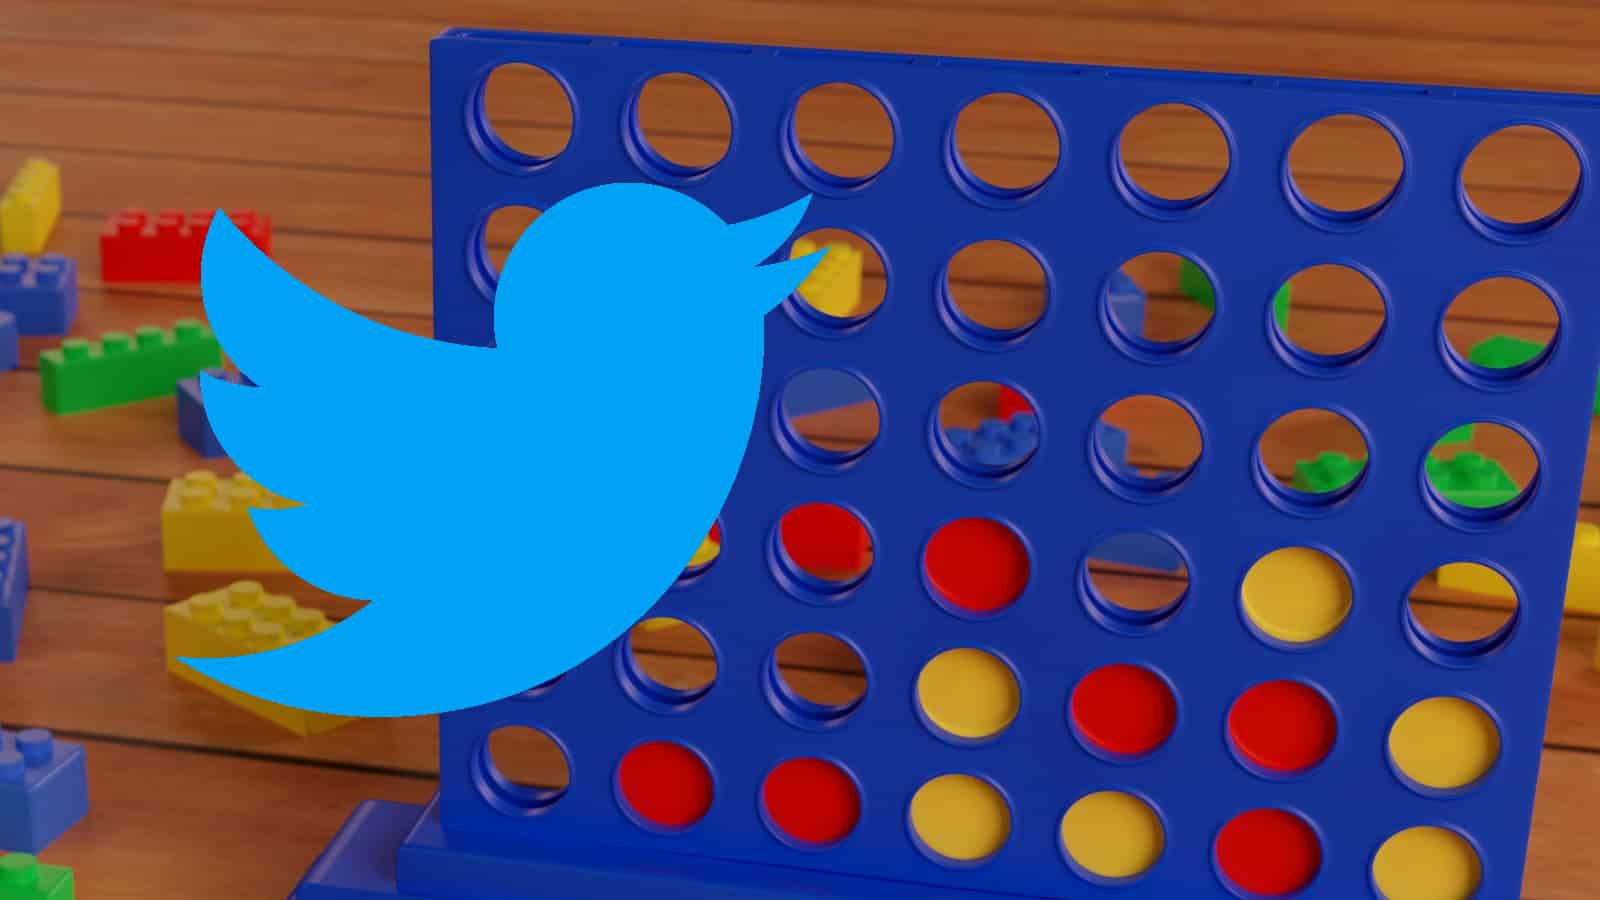 Connect 4 board with a Twitter logo